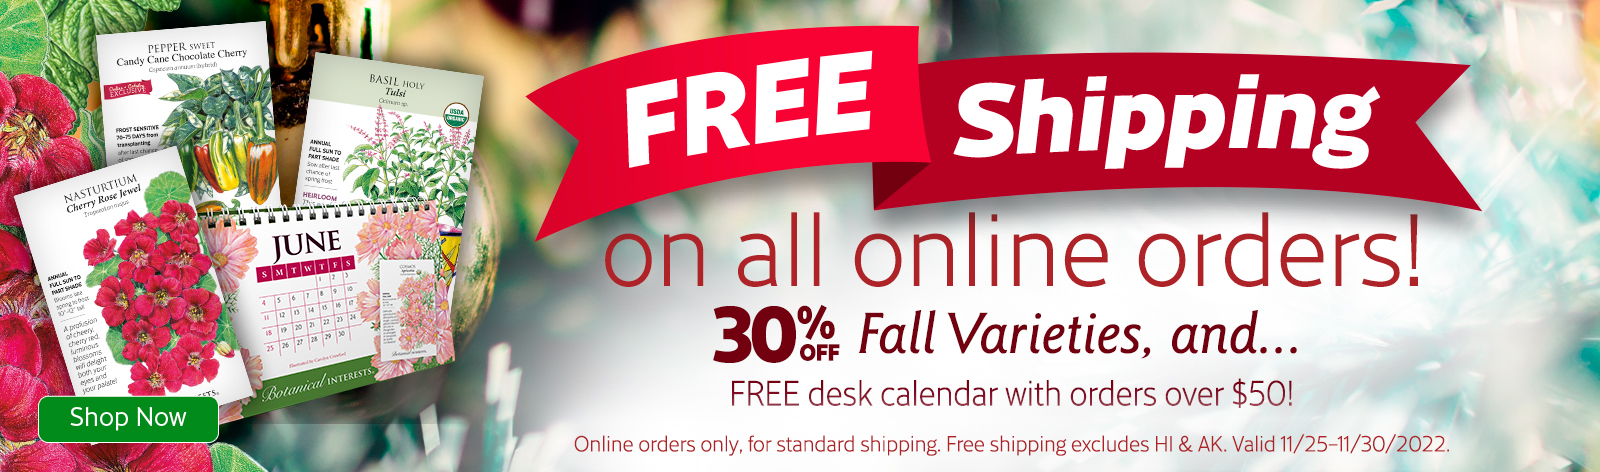 Free shipping on all orders, free calendar over $50, and 30% off fall varieties 11/25-11/30